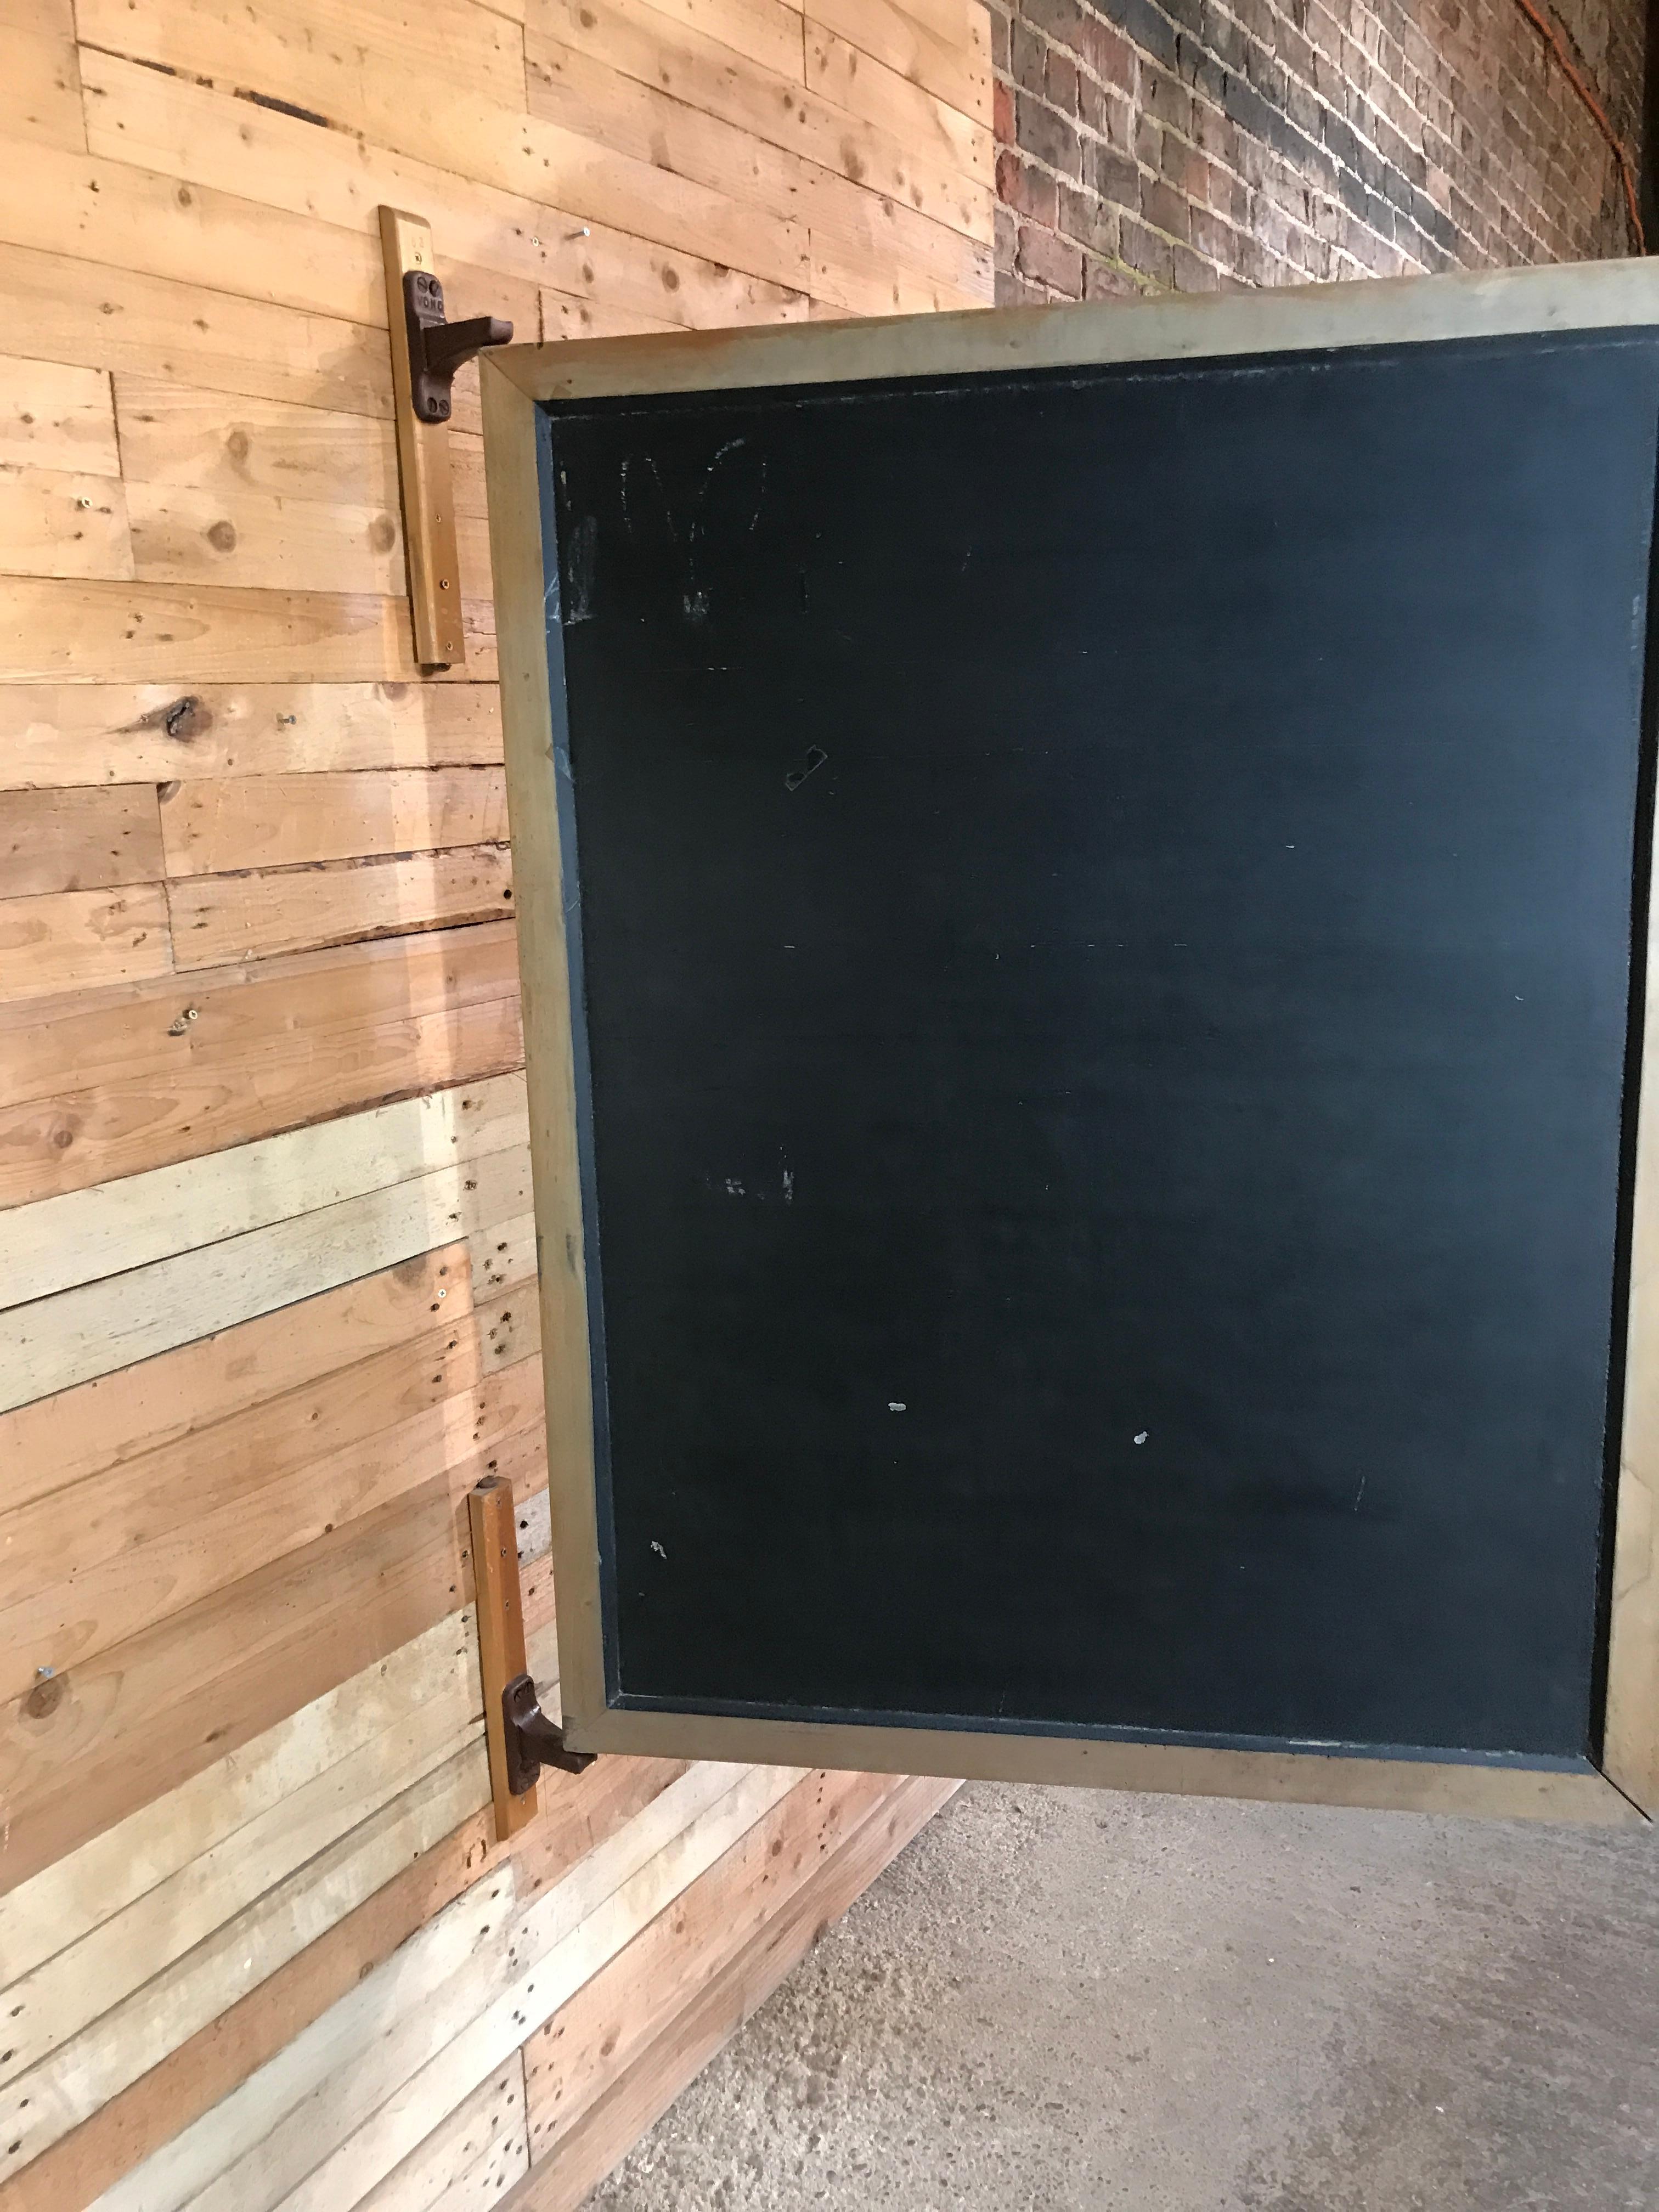 Early 20th Century Large Original Industrial Blackboard with Cast Iron Wall Attachment